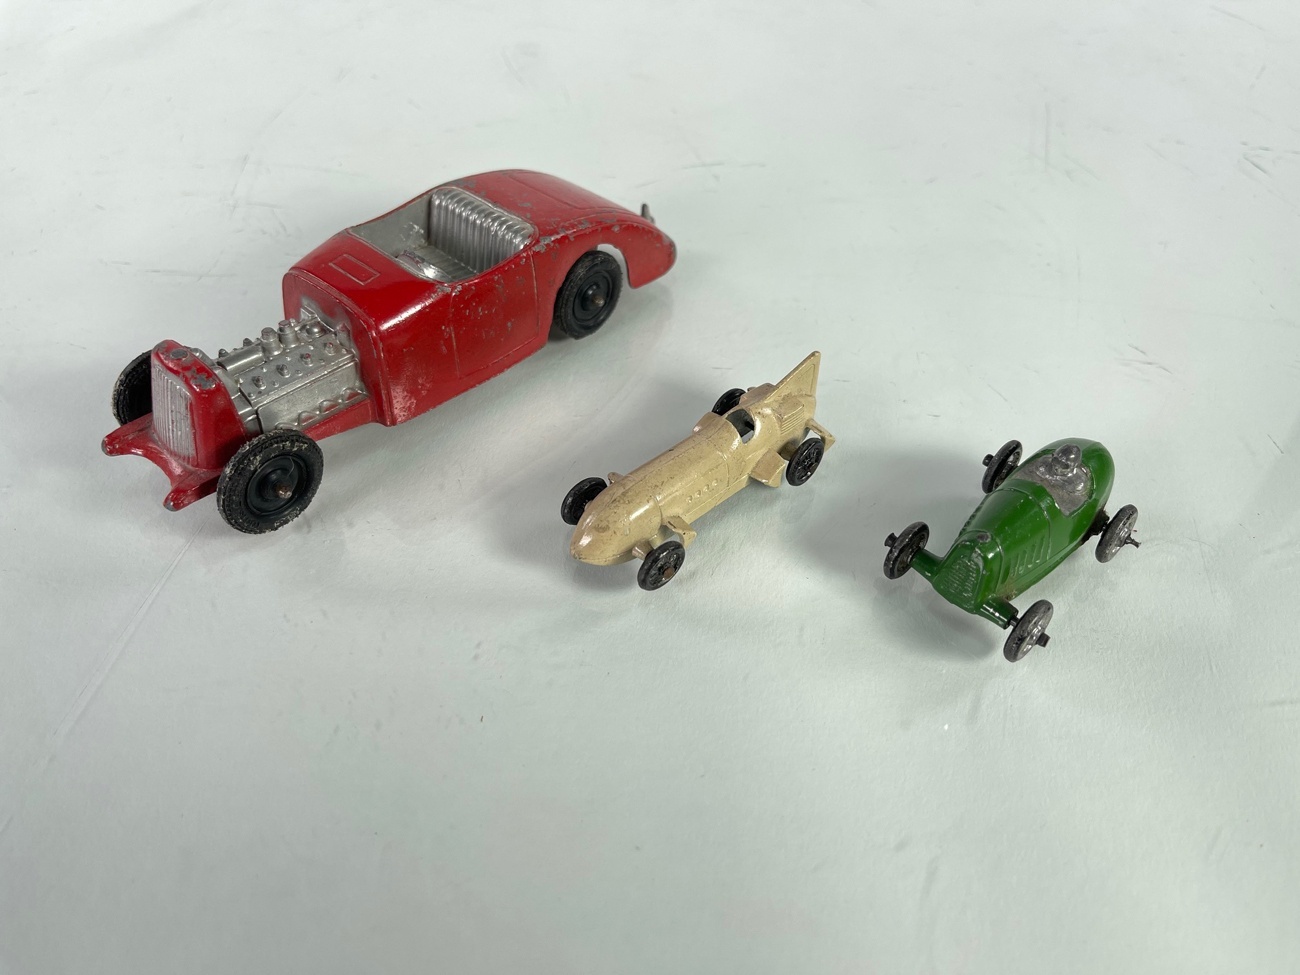 Details about   Vintage Toy Cars Tonka Matchbox Hot Wheels Hubley Tootsie toy Metal Cars 